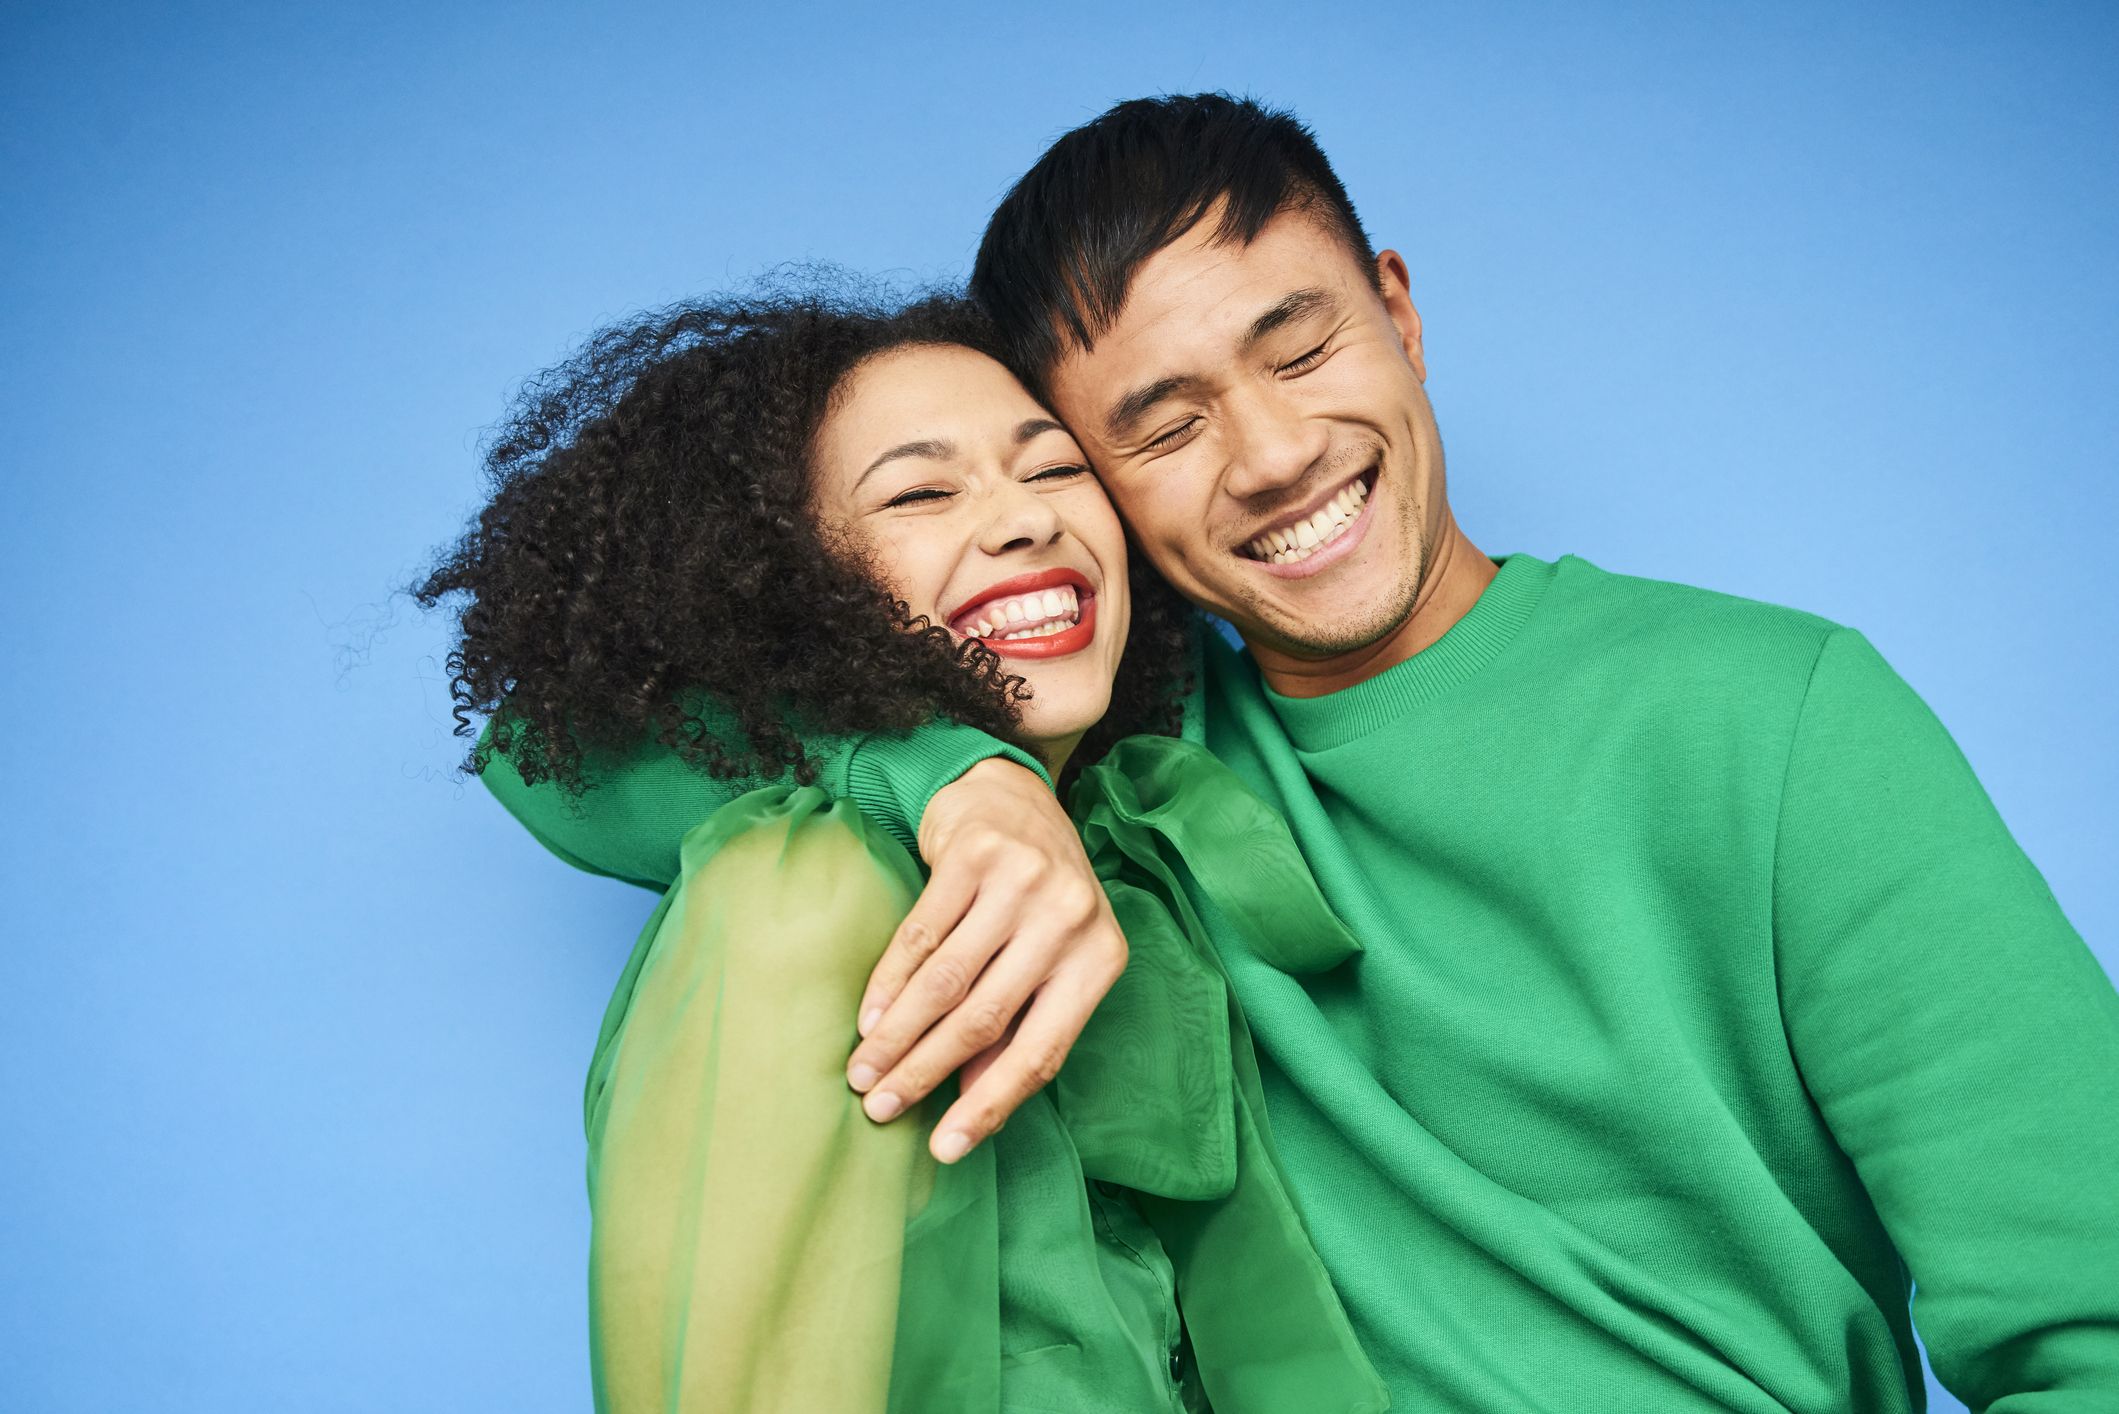 Couples Quiz How Well Do You Know Your Partner?